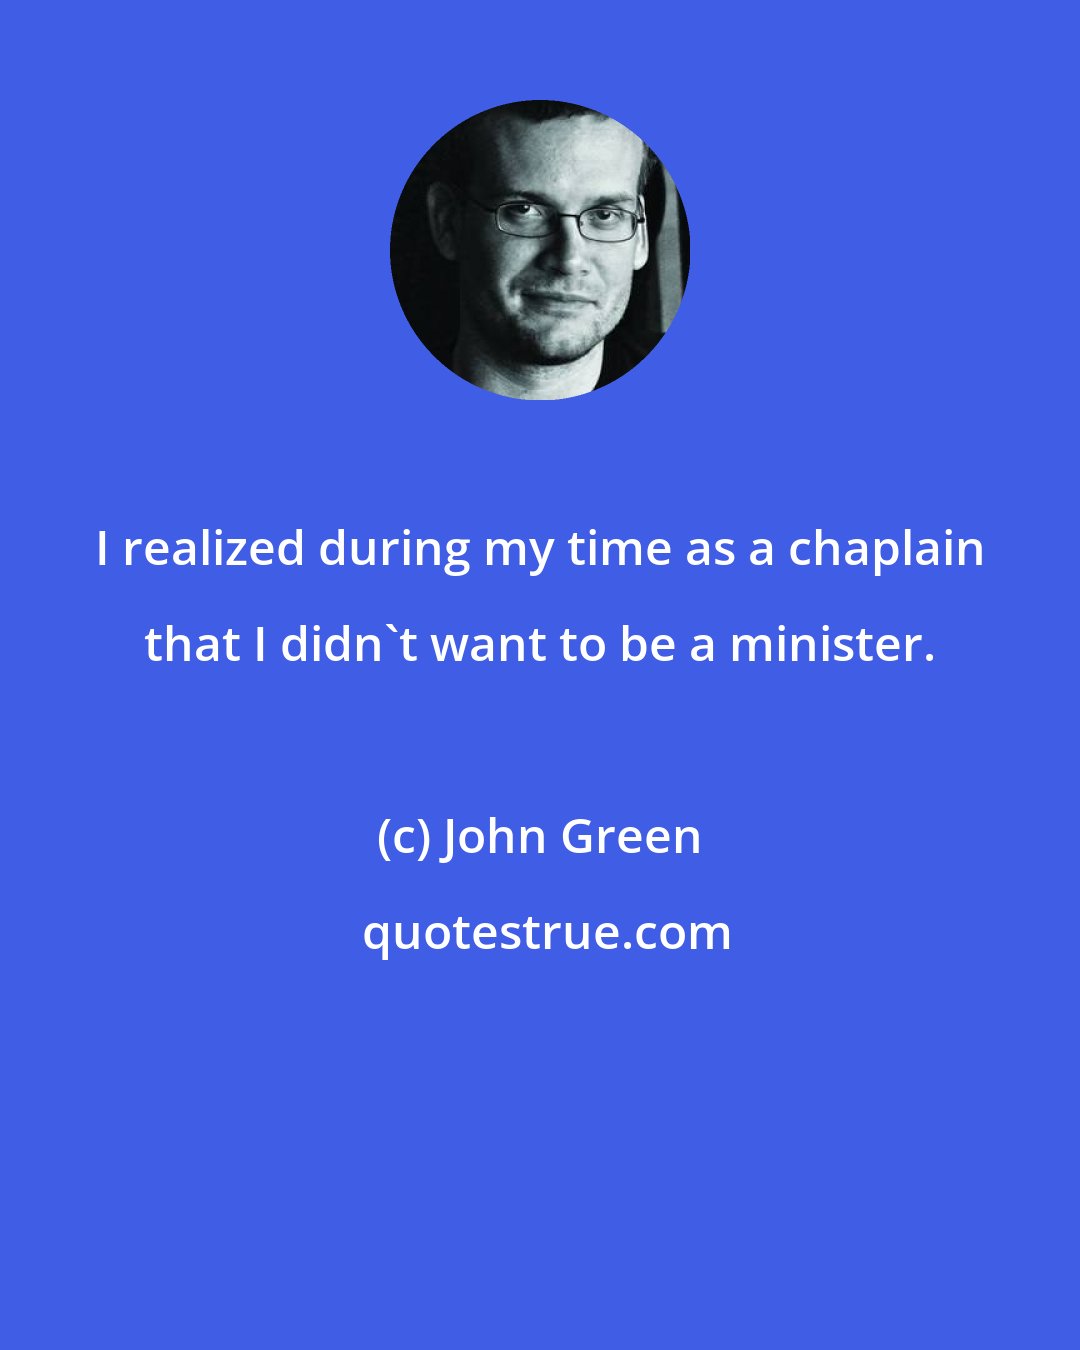 John Green: I realized during my time as a chaplain that I didn't want to be a minister.